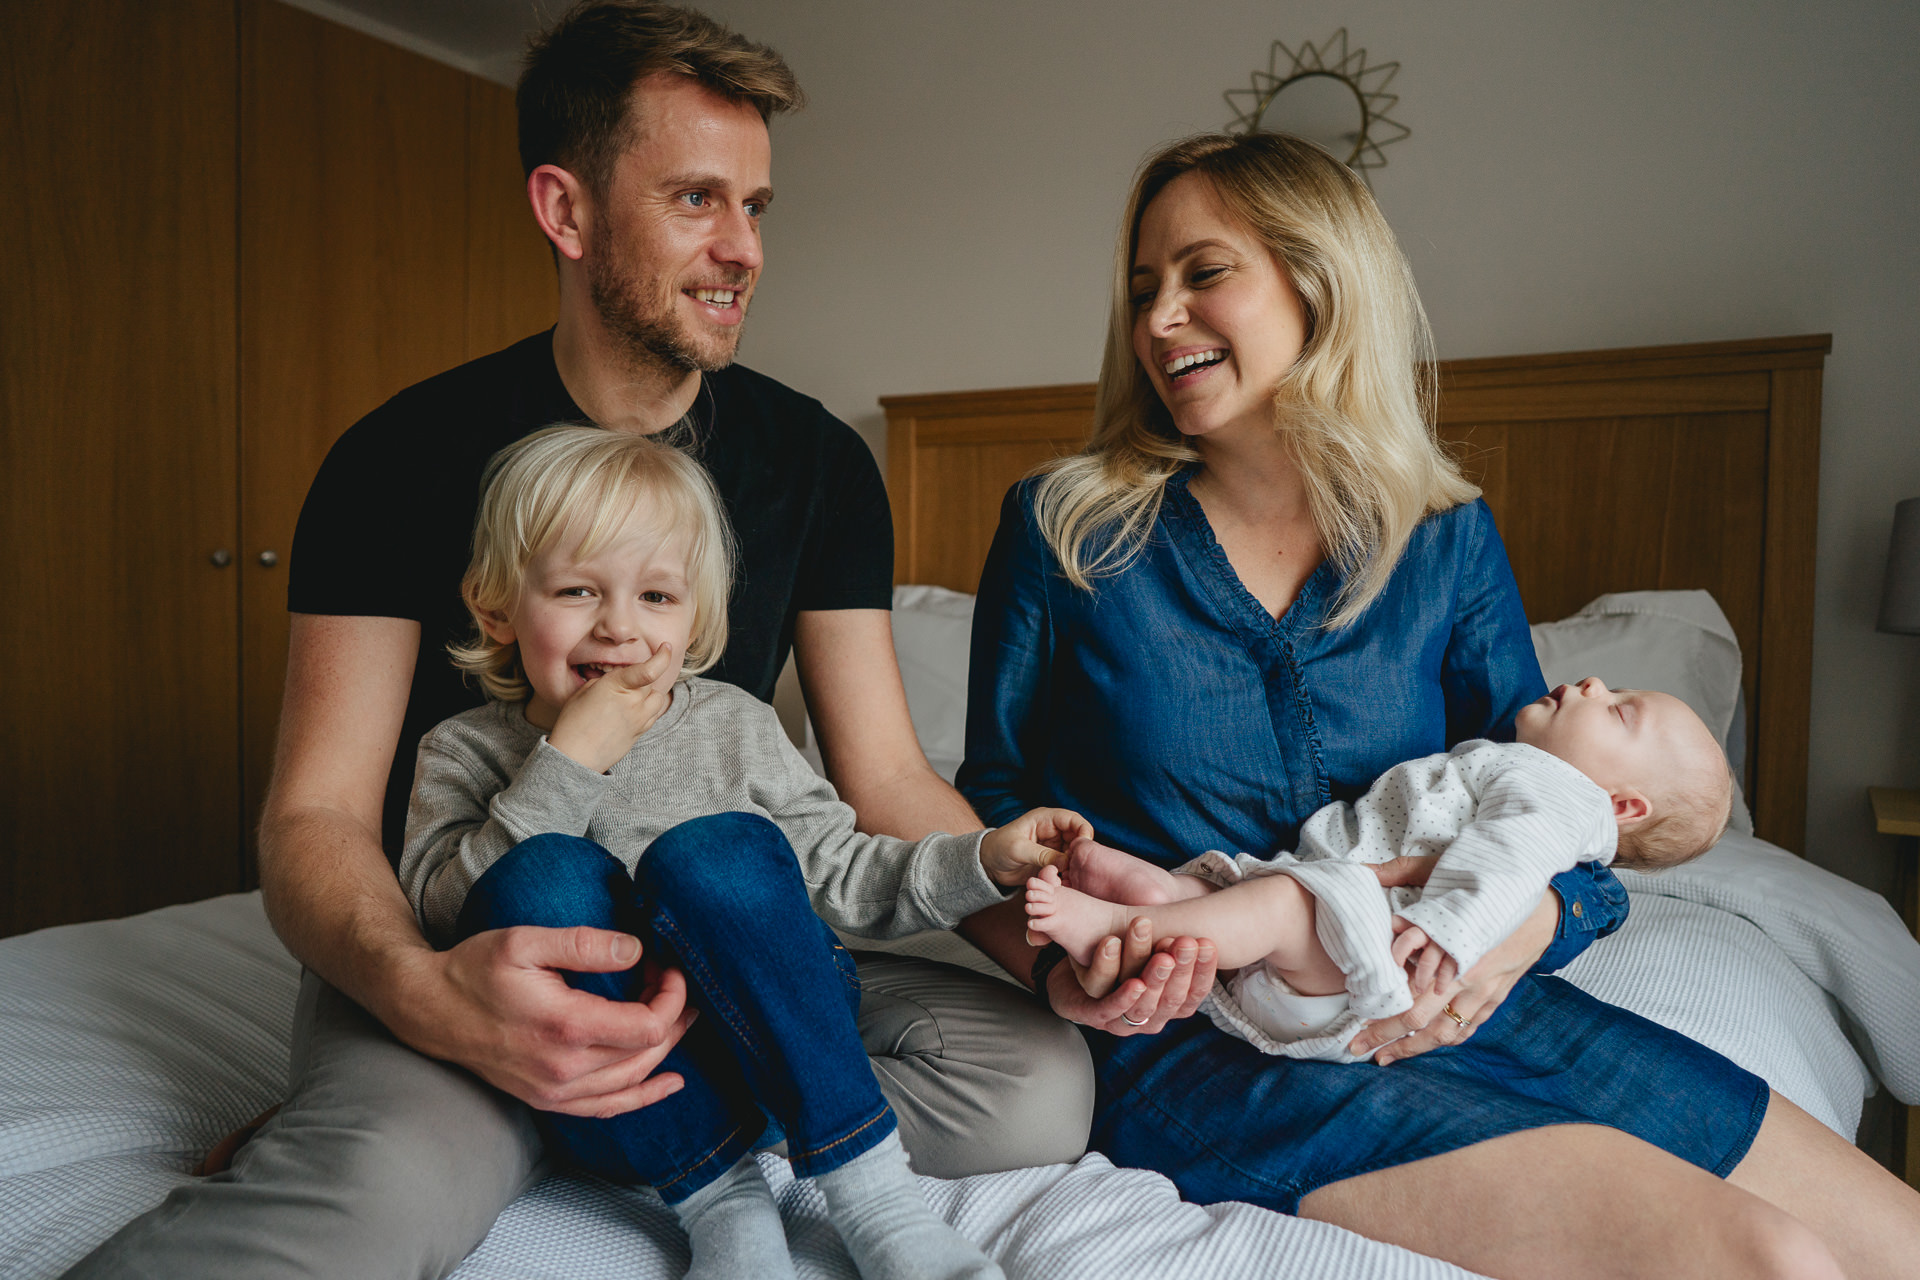 Dorset family photoshoot - a Mum, Dad, young boy and baby laughing on a bed together